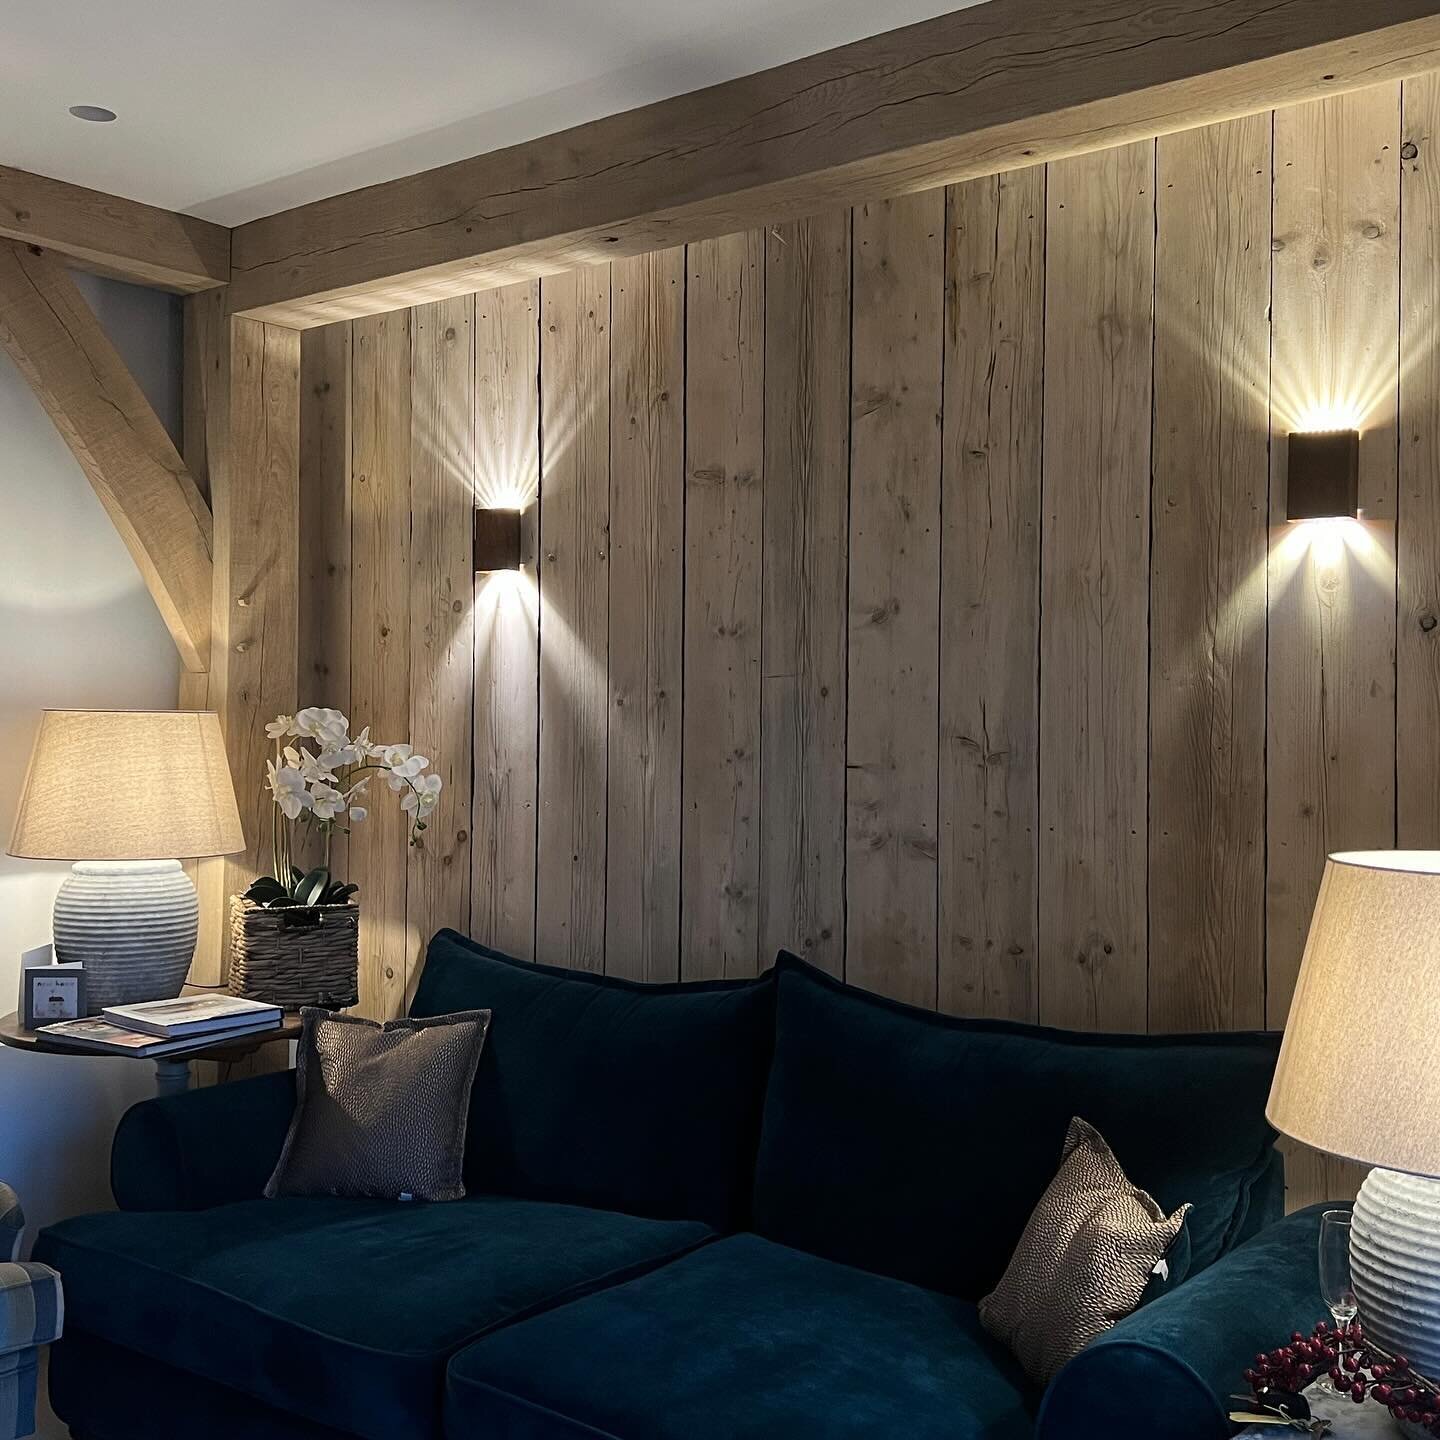 A gorgeous barn conversion from last year we were involved in - now forming a gorgeous cosy home, with timber a constant feature throughout the structure and fit out. 

Frame design by @studiomuus 
Fabrication by @hutispace 

The original cobb walls 